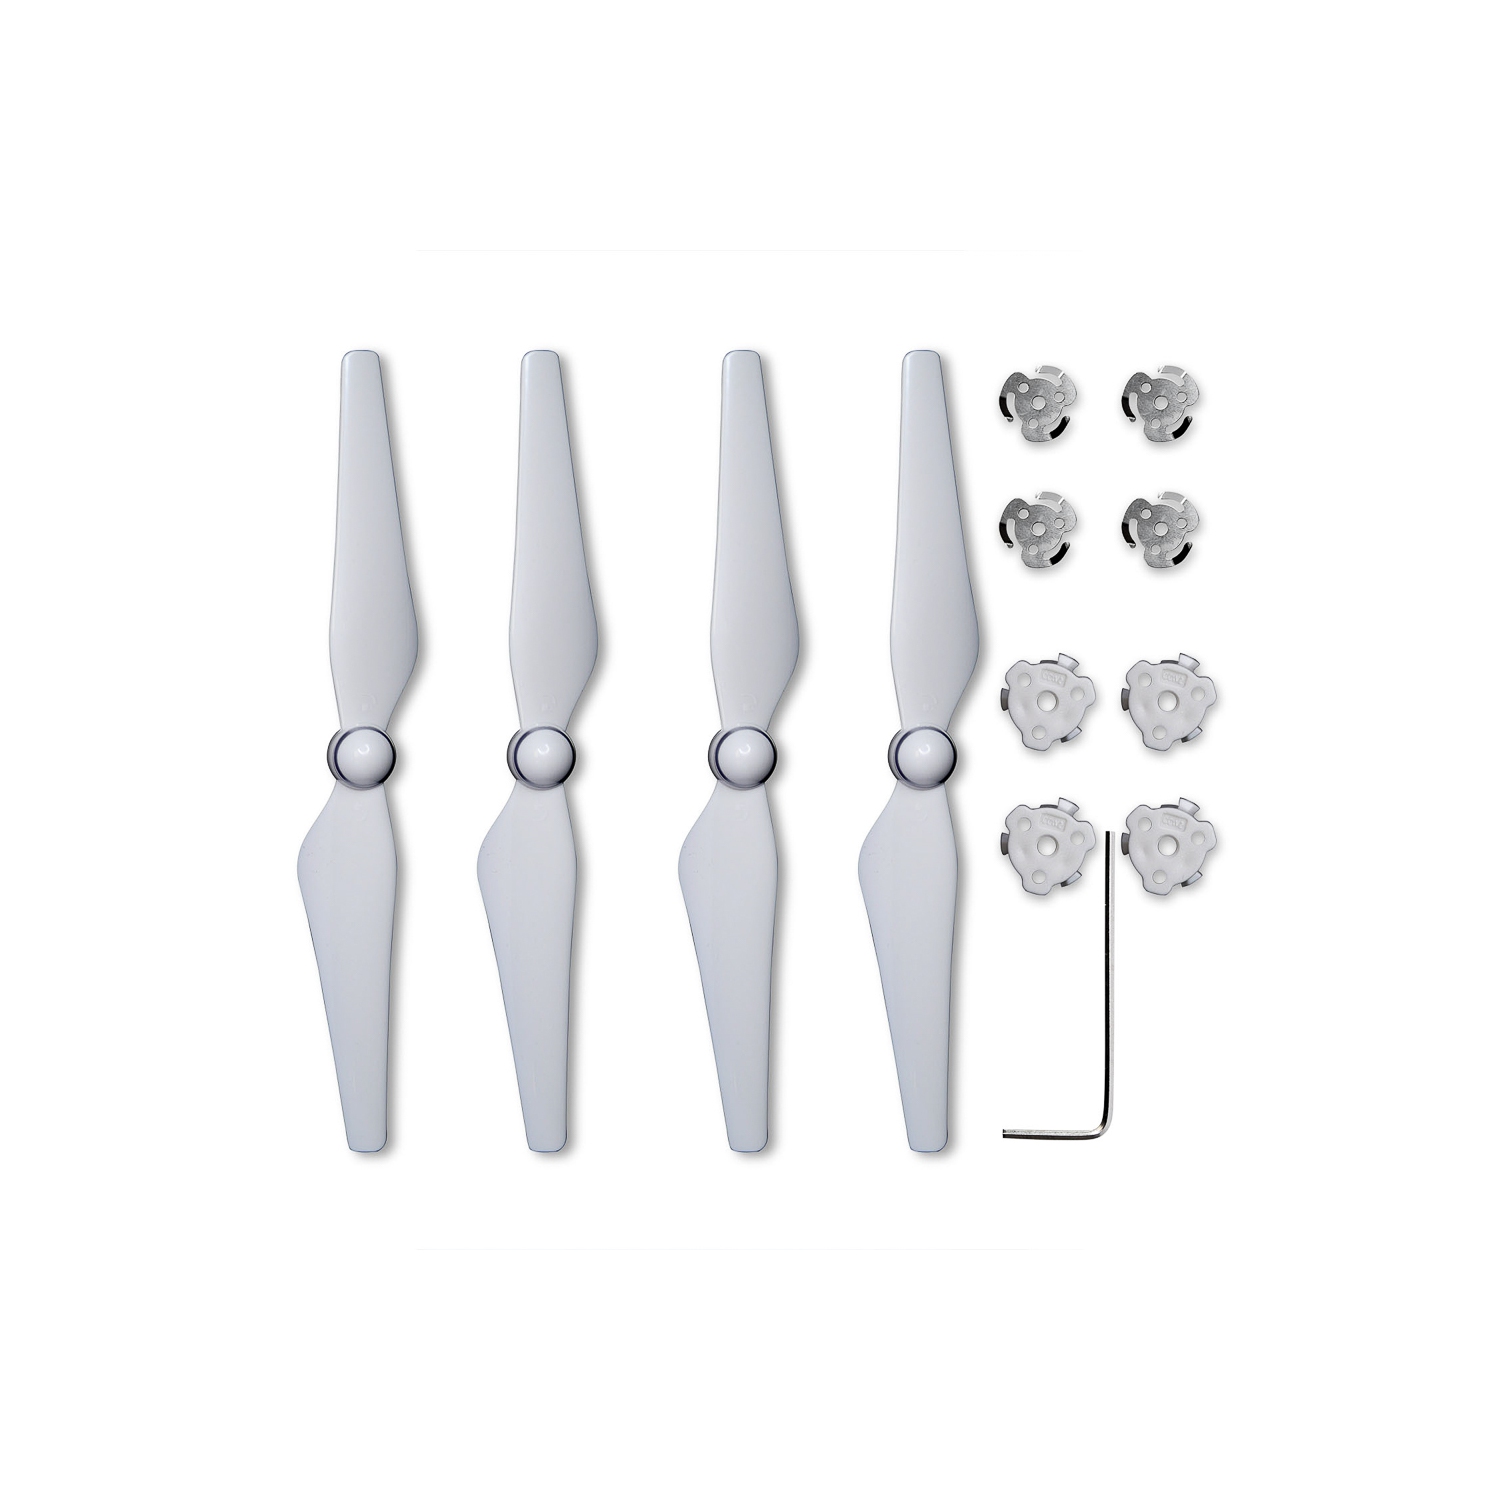 Ultimaxx 2 Pairs Quick Release Propellers Blades For DJI Phantom 4 Pro And Phantom 4 Advanced (White) - Installation Kit Inclu